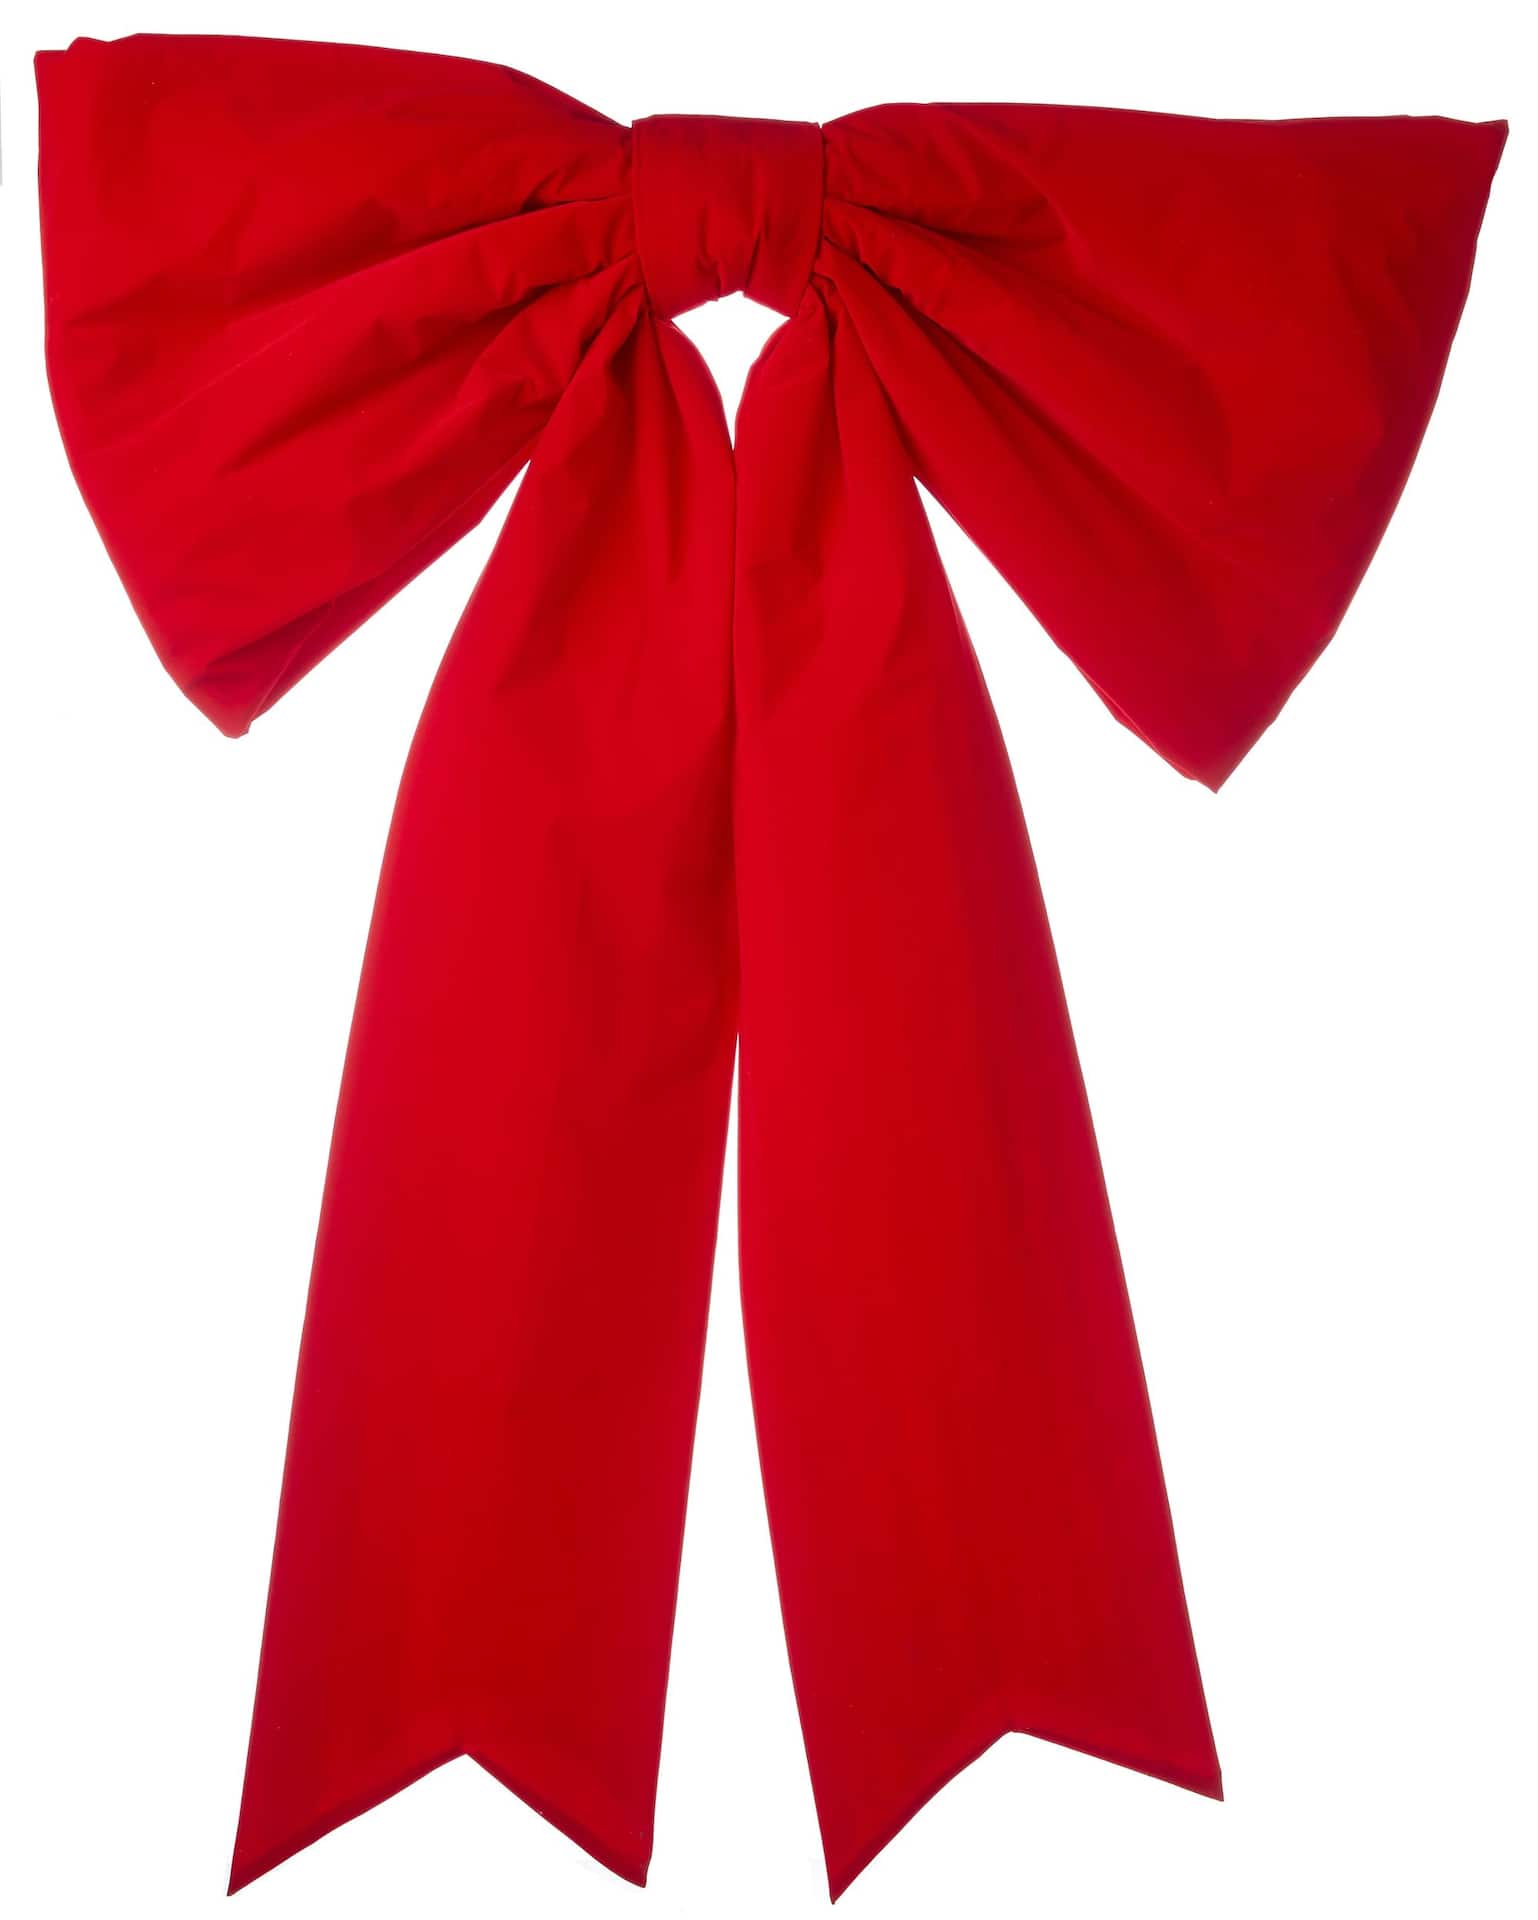 Red Velvet Christmas Bow 9-inch X 16-inch 4 Pack of Holiday Bows